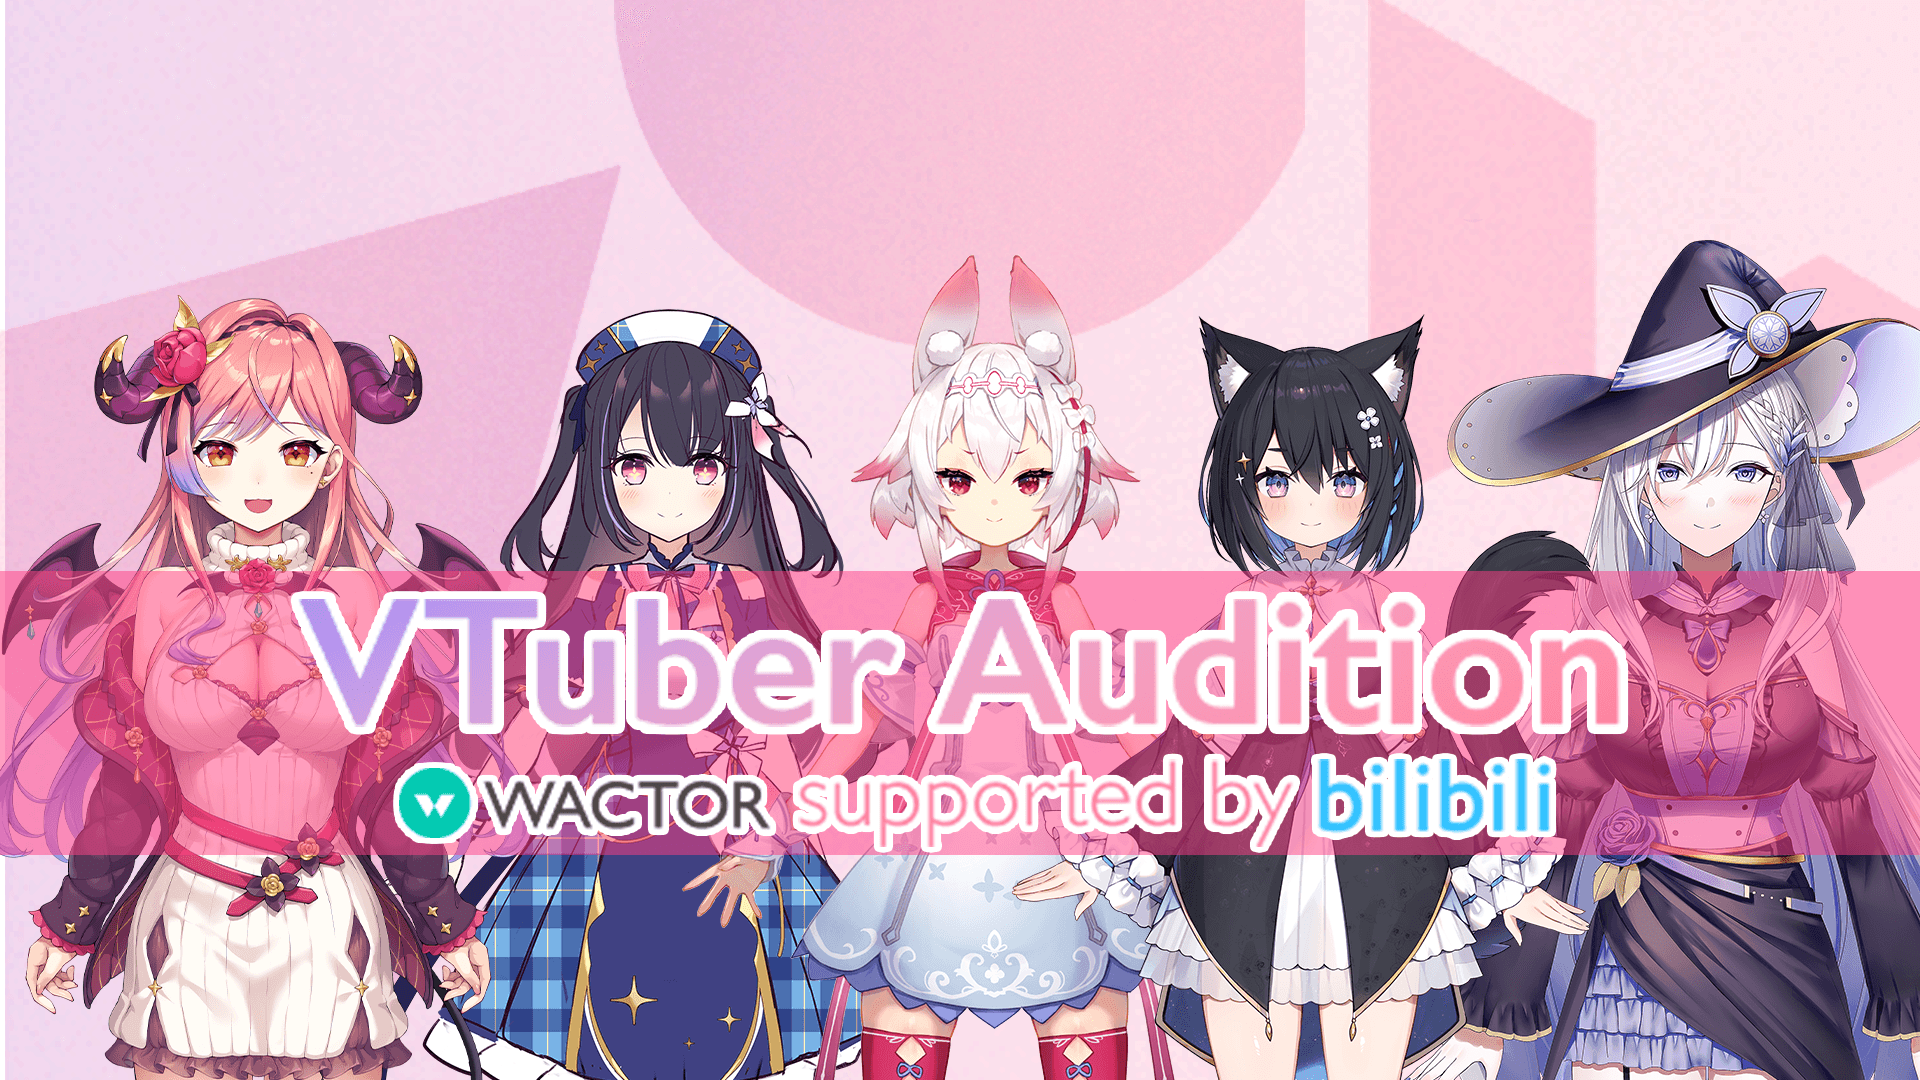 wactor-vtuber-audition-supported-by-bilibili-1-2